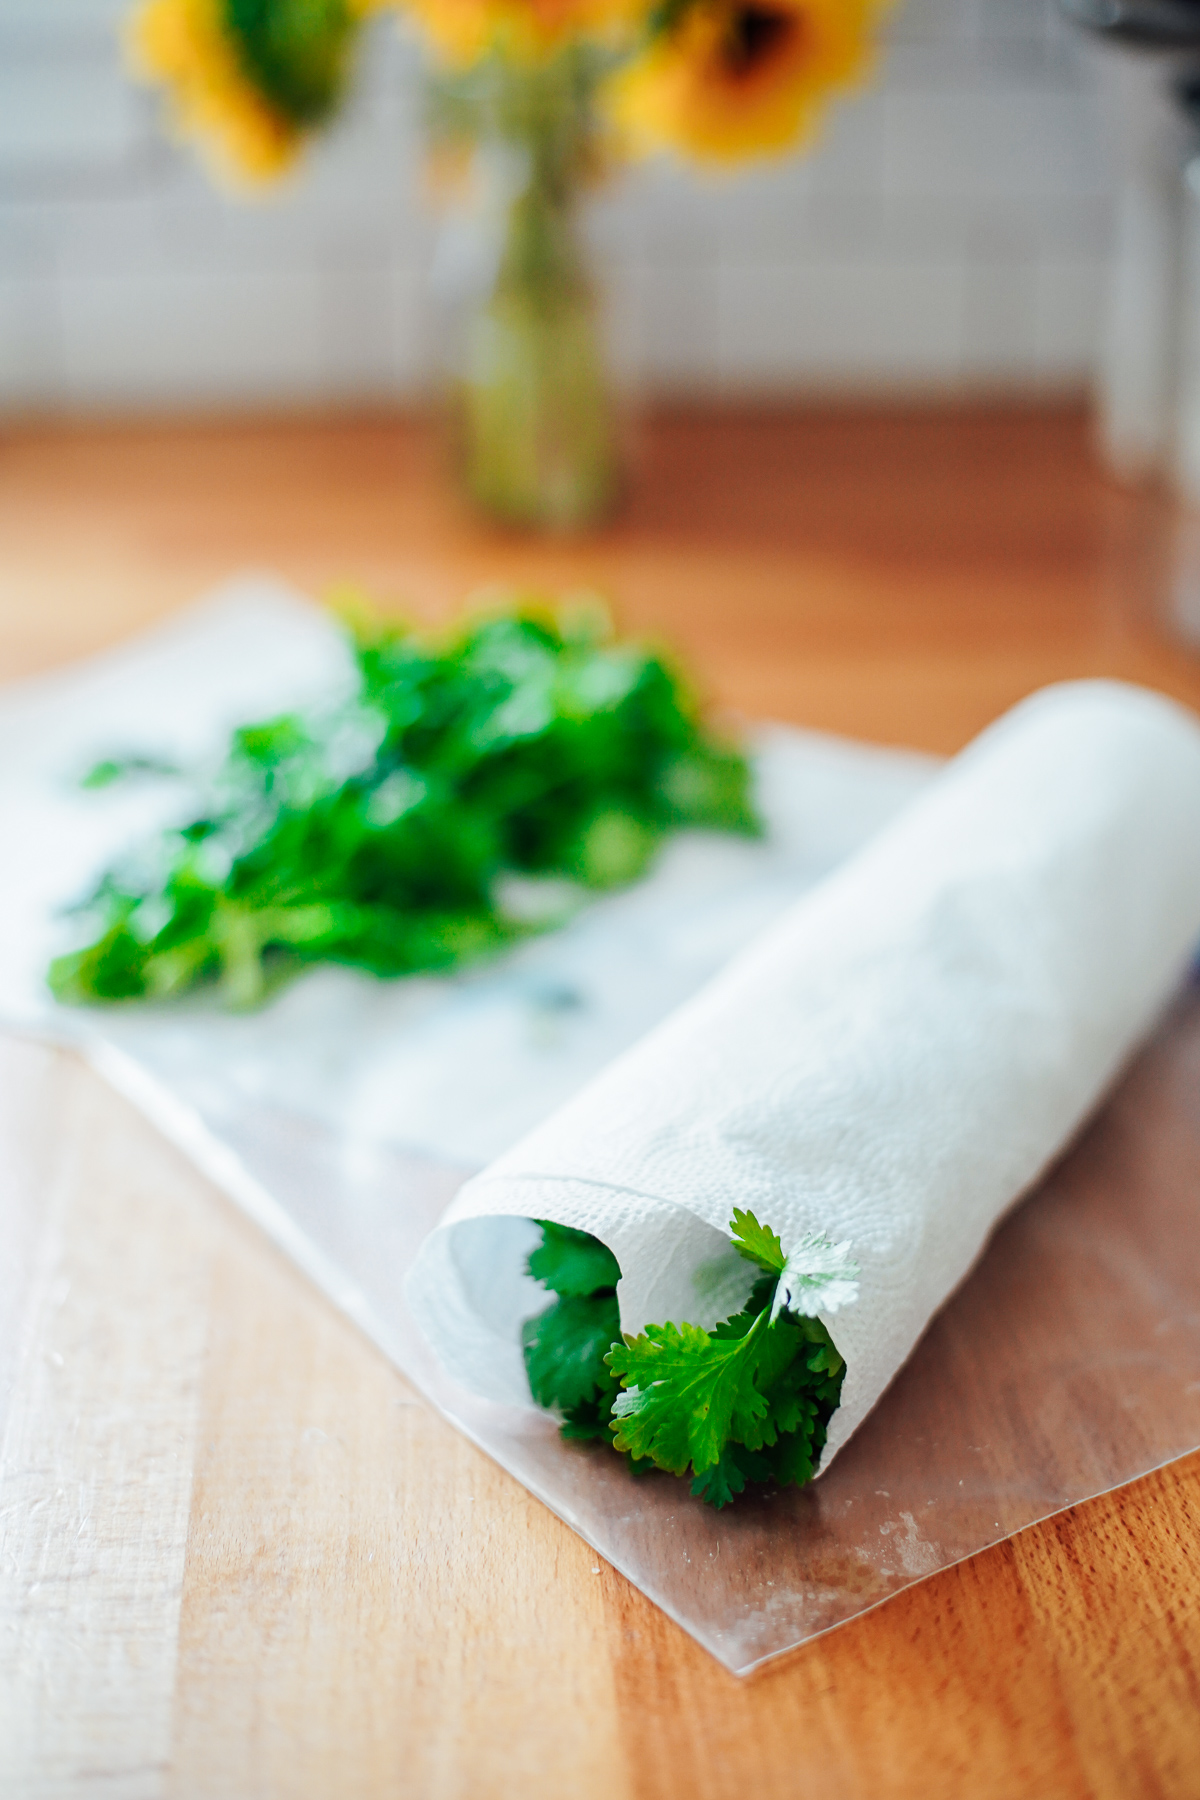 Cilantro rolled up like a jelly roll in a paper towel on the kitchen counter.